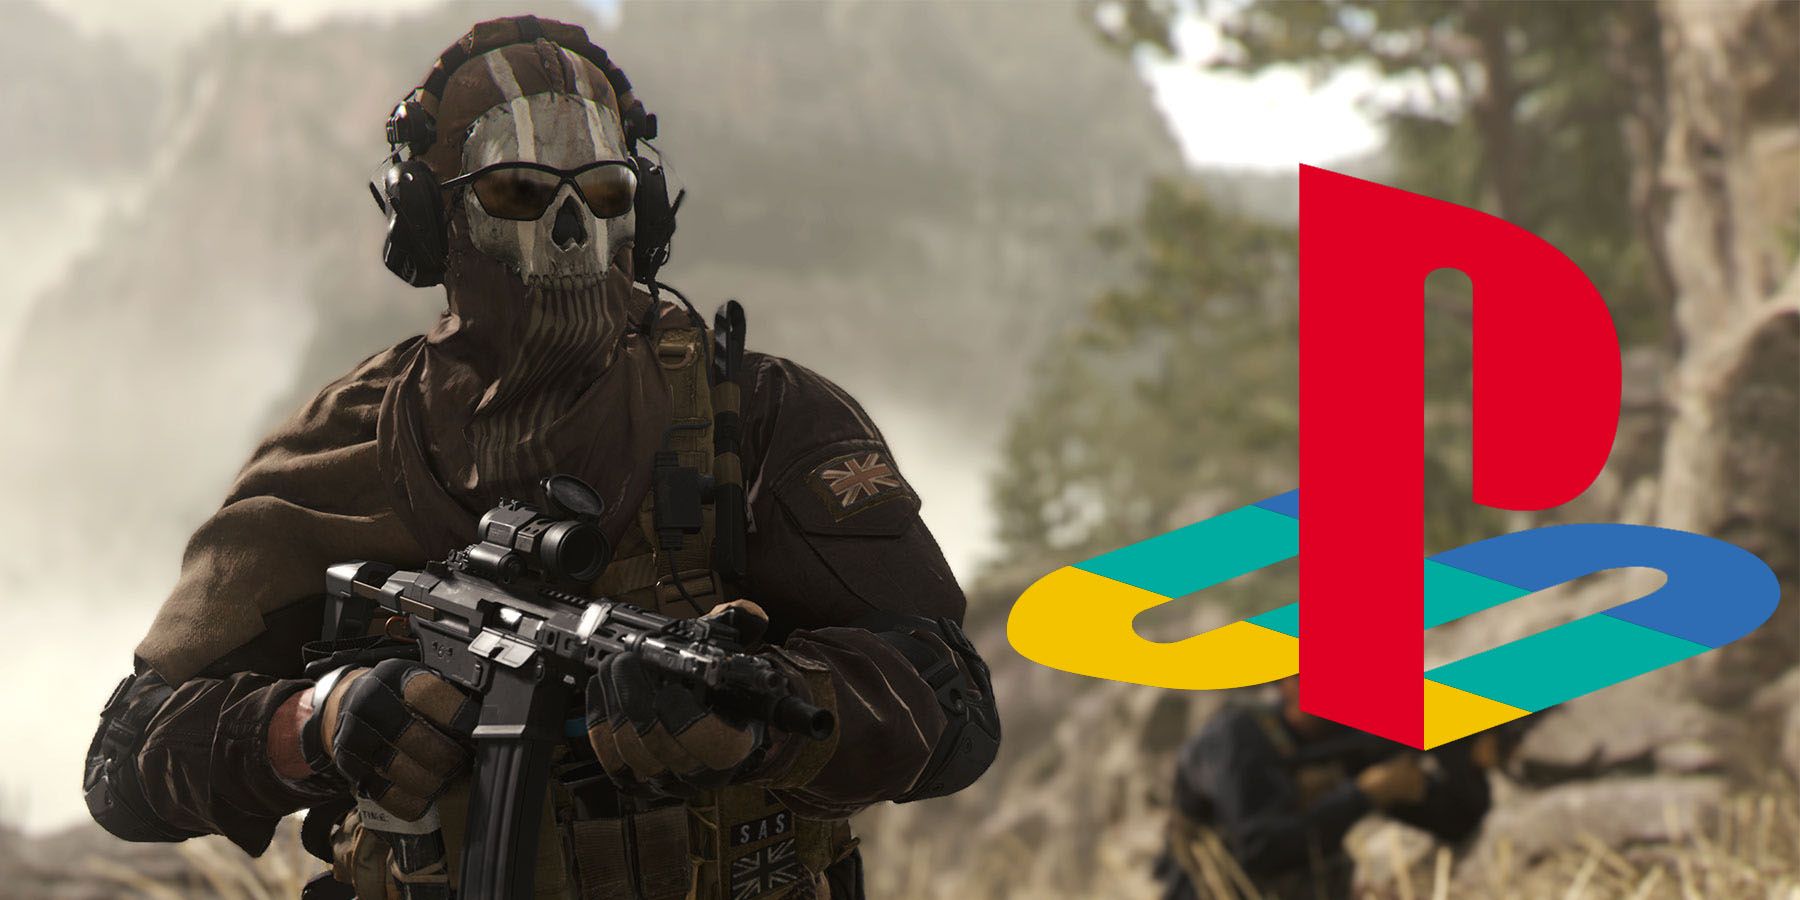 A screenshot from Call of Duty, featuring a soldier standing next to a PlayStation logo.